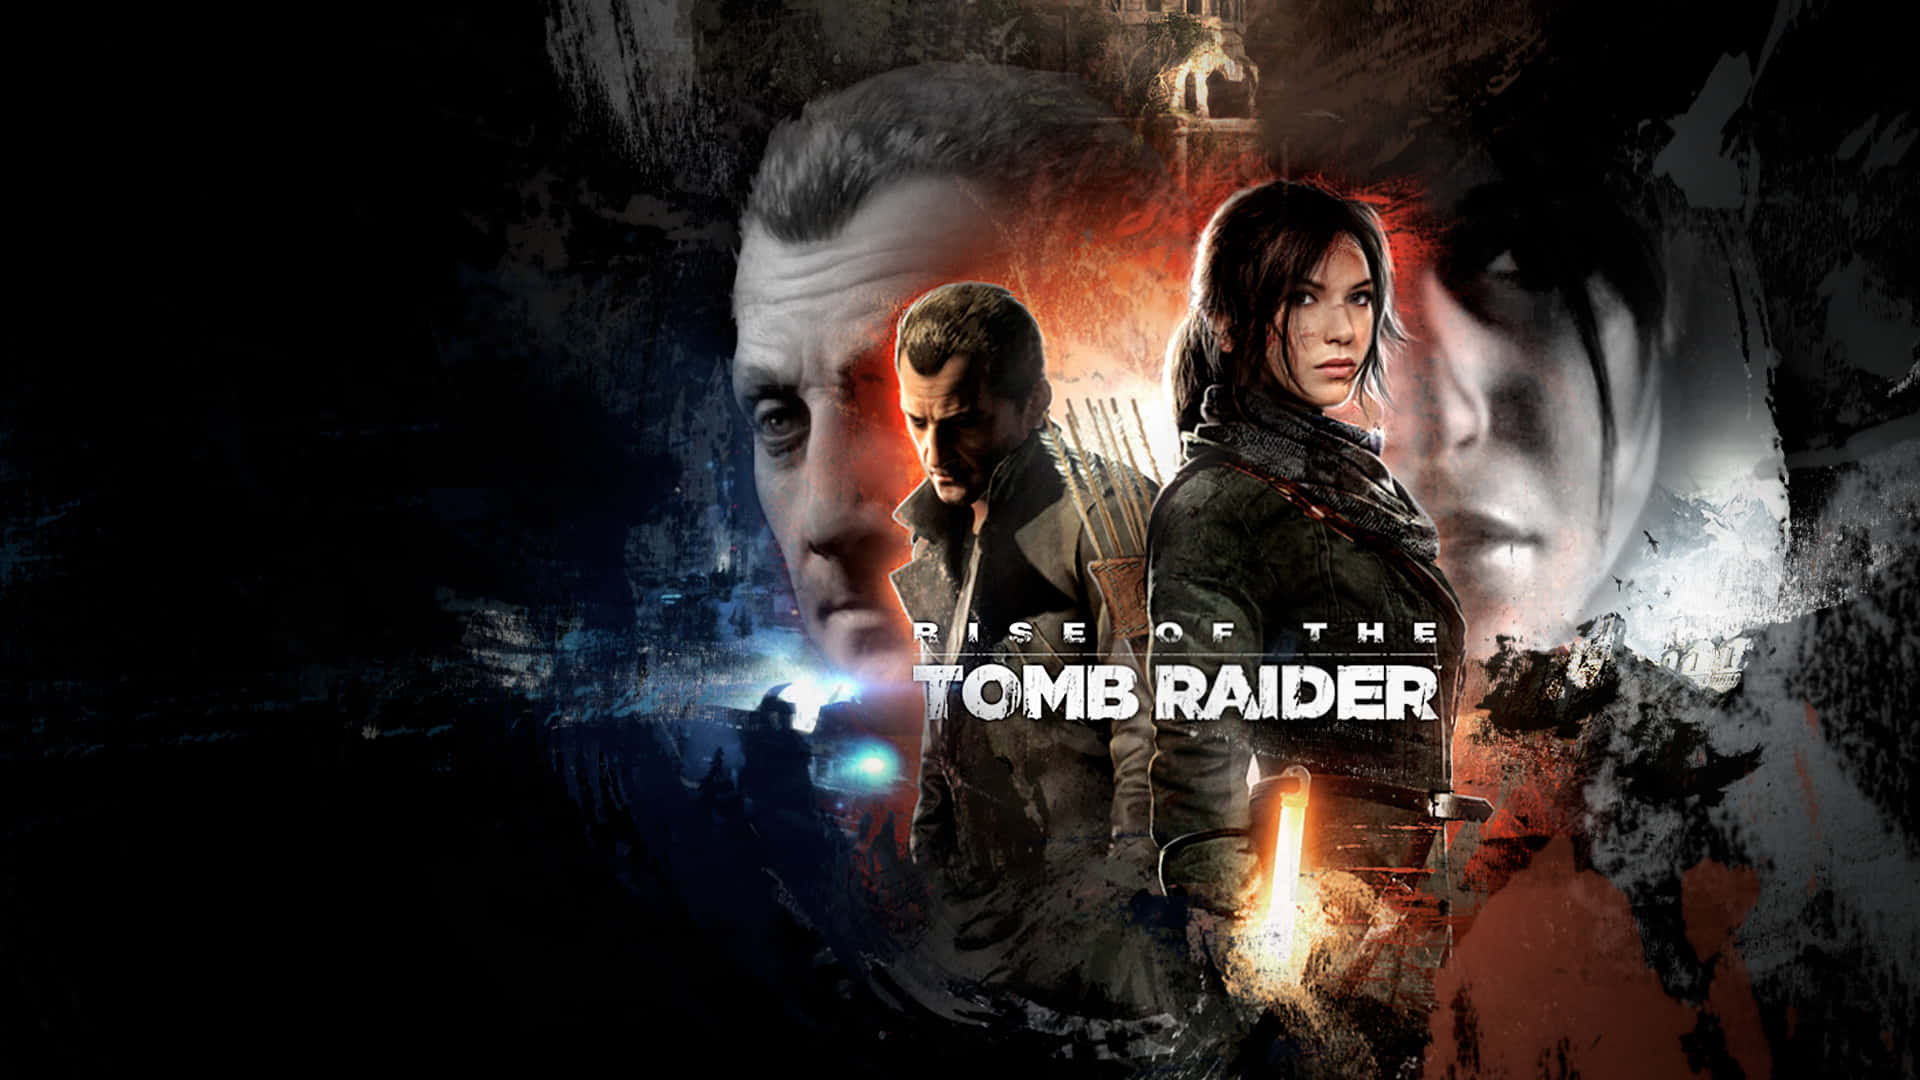 The Tomb Raider Is Shown On The Cover Background